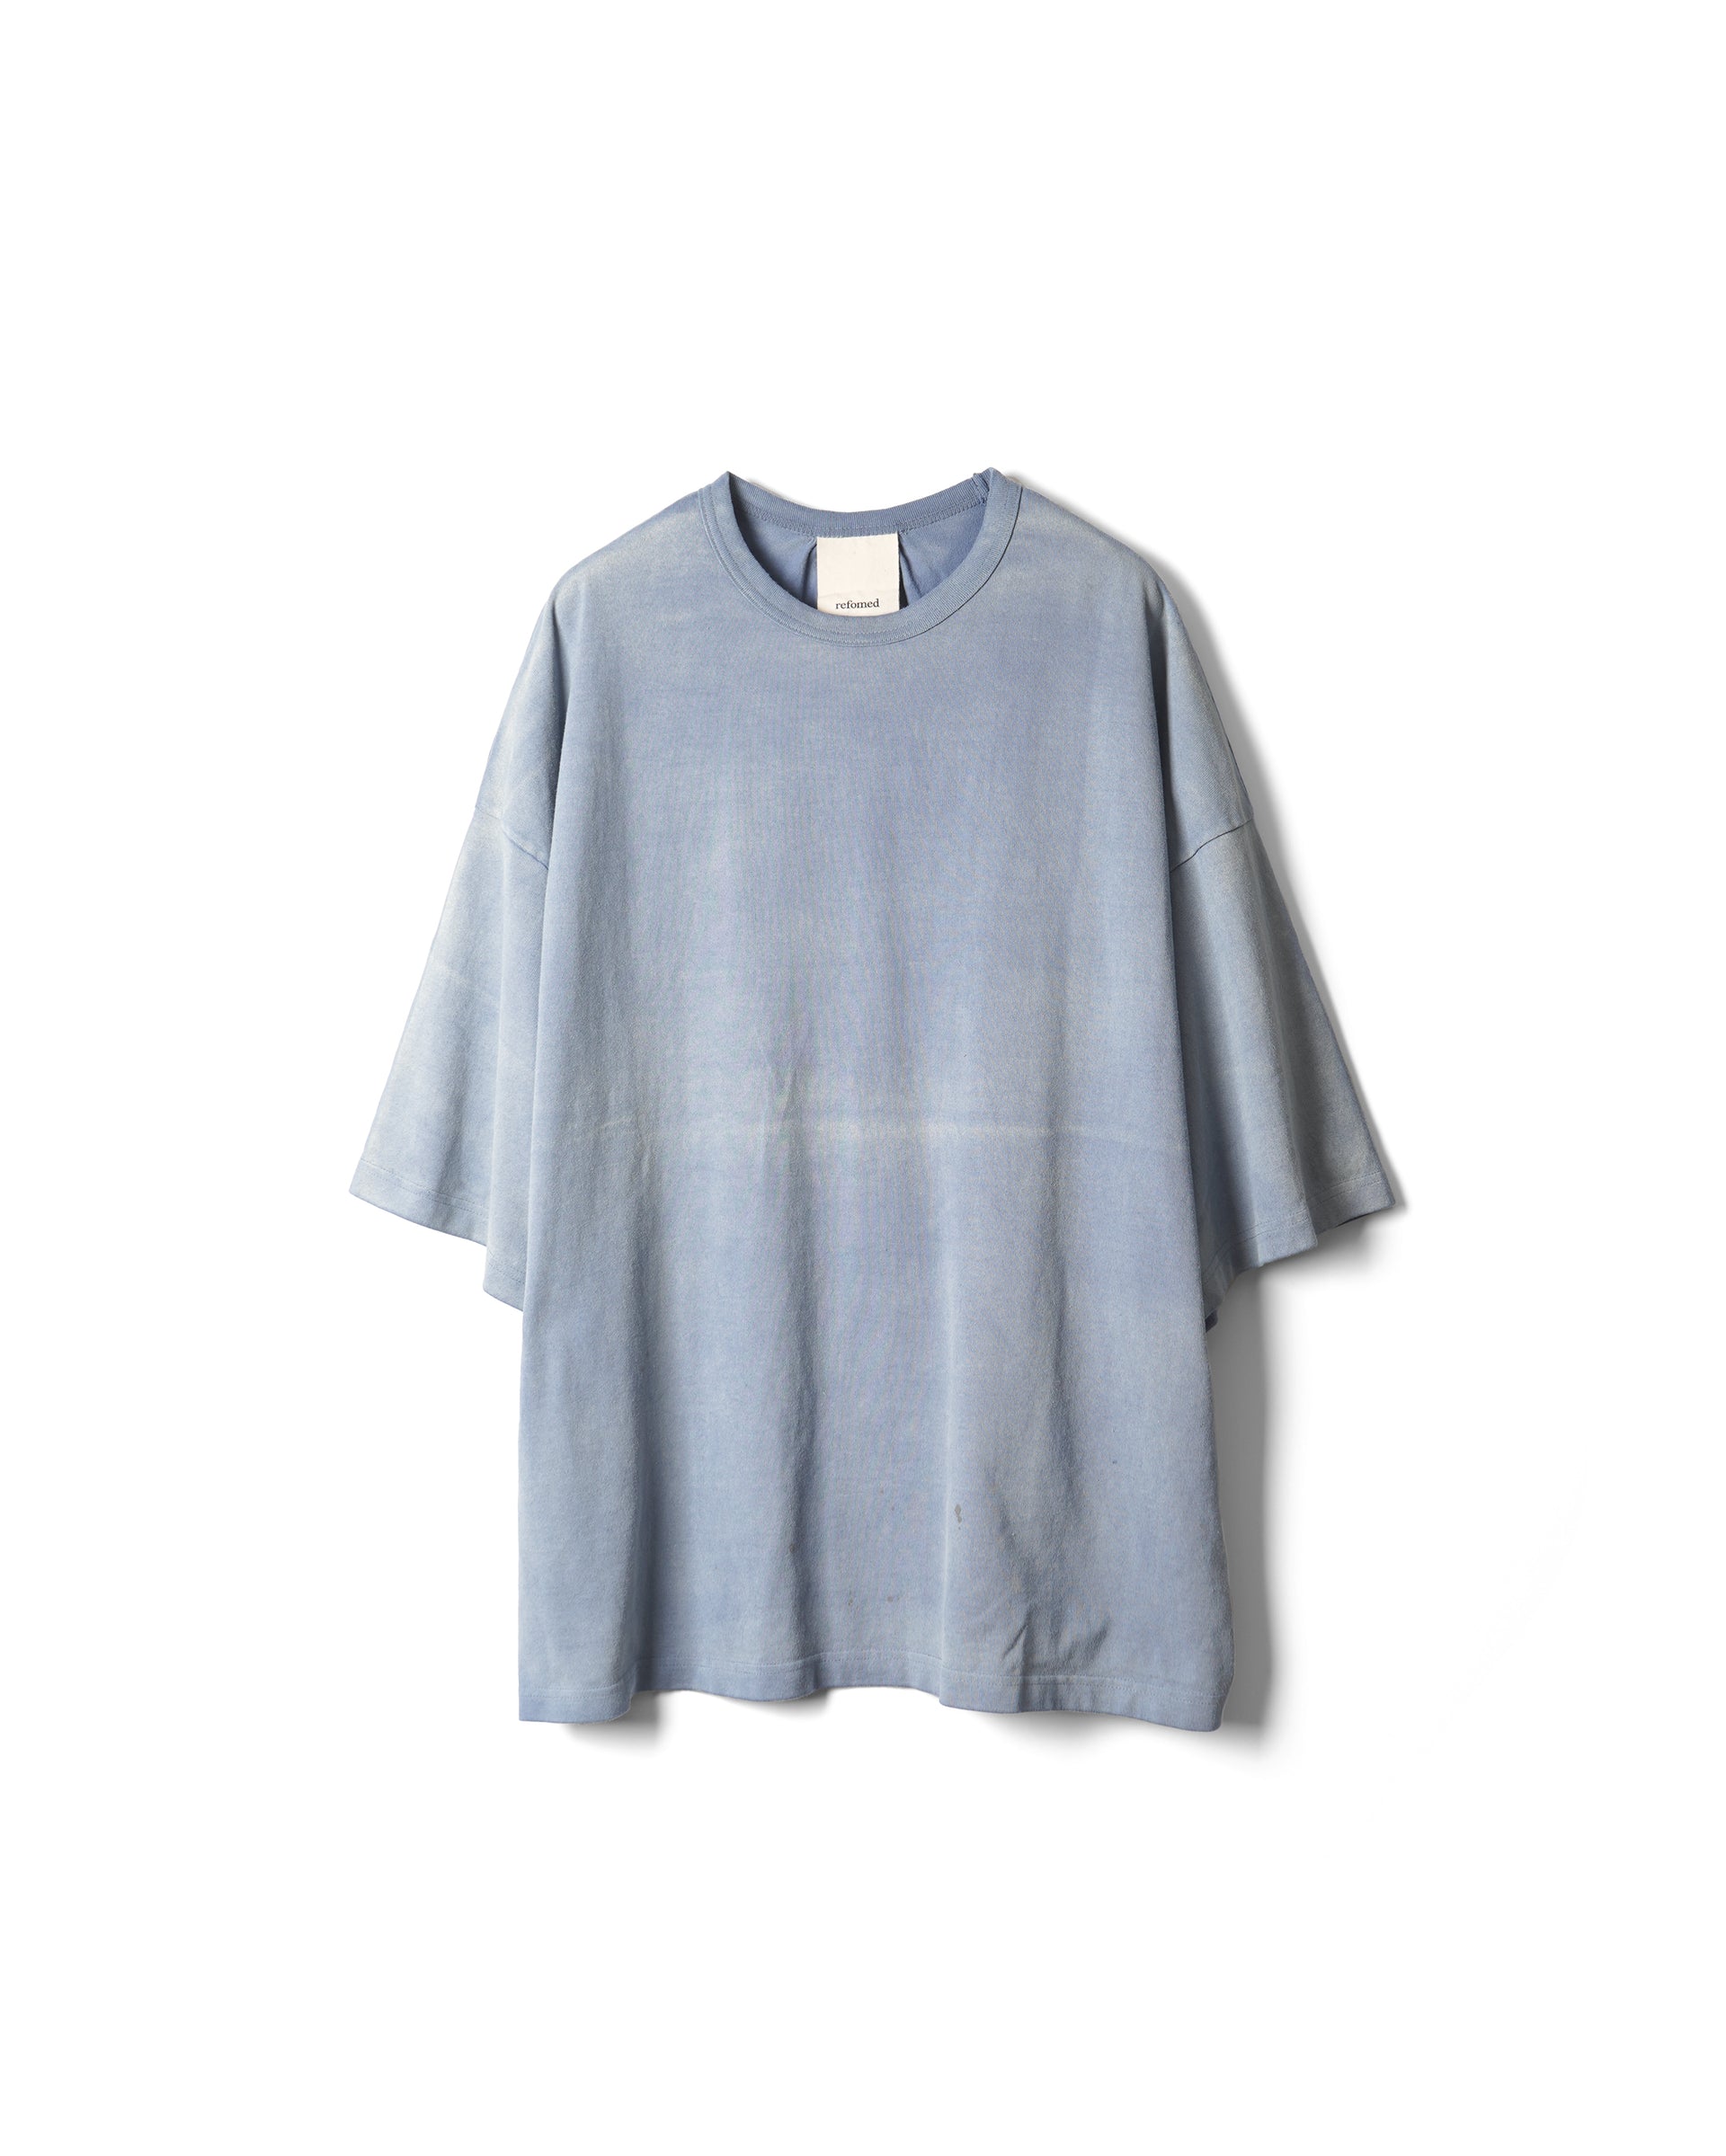 【REFOMED】10WASH GIANT TEE - BLUE